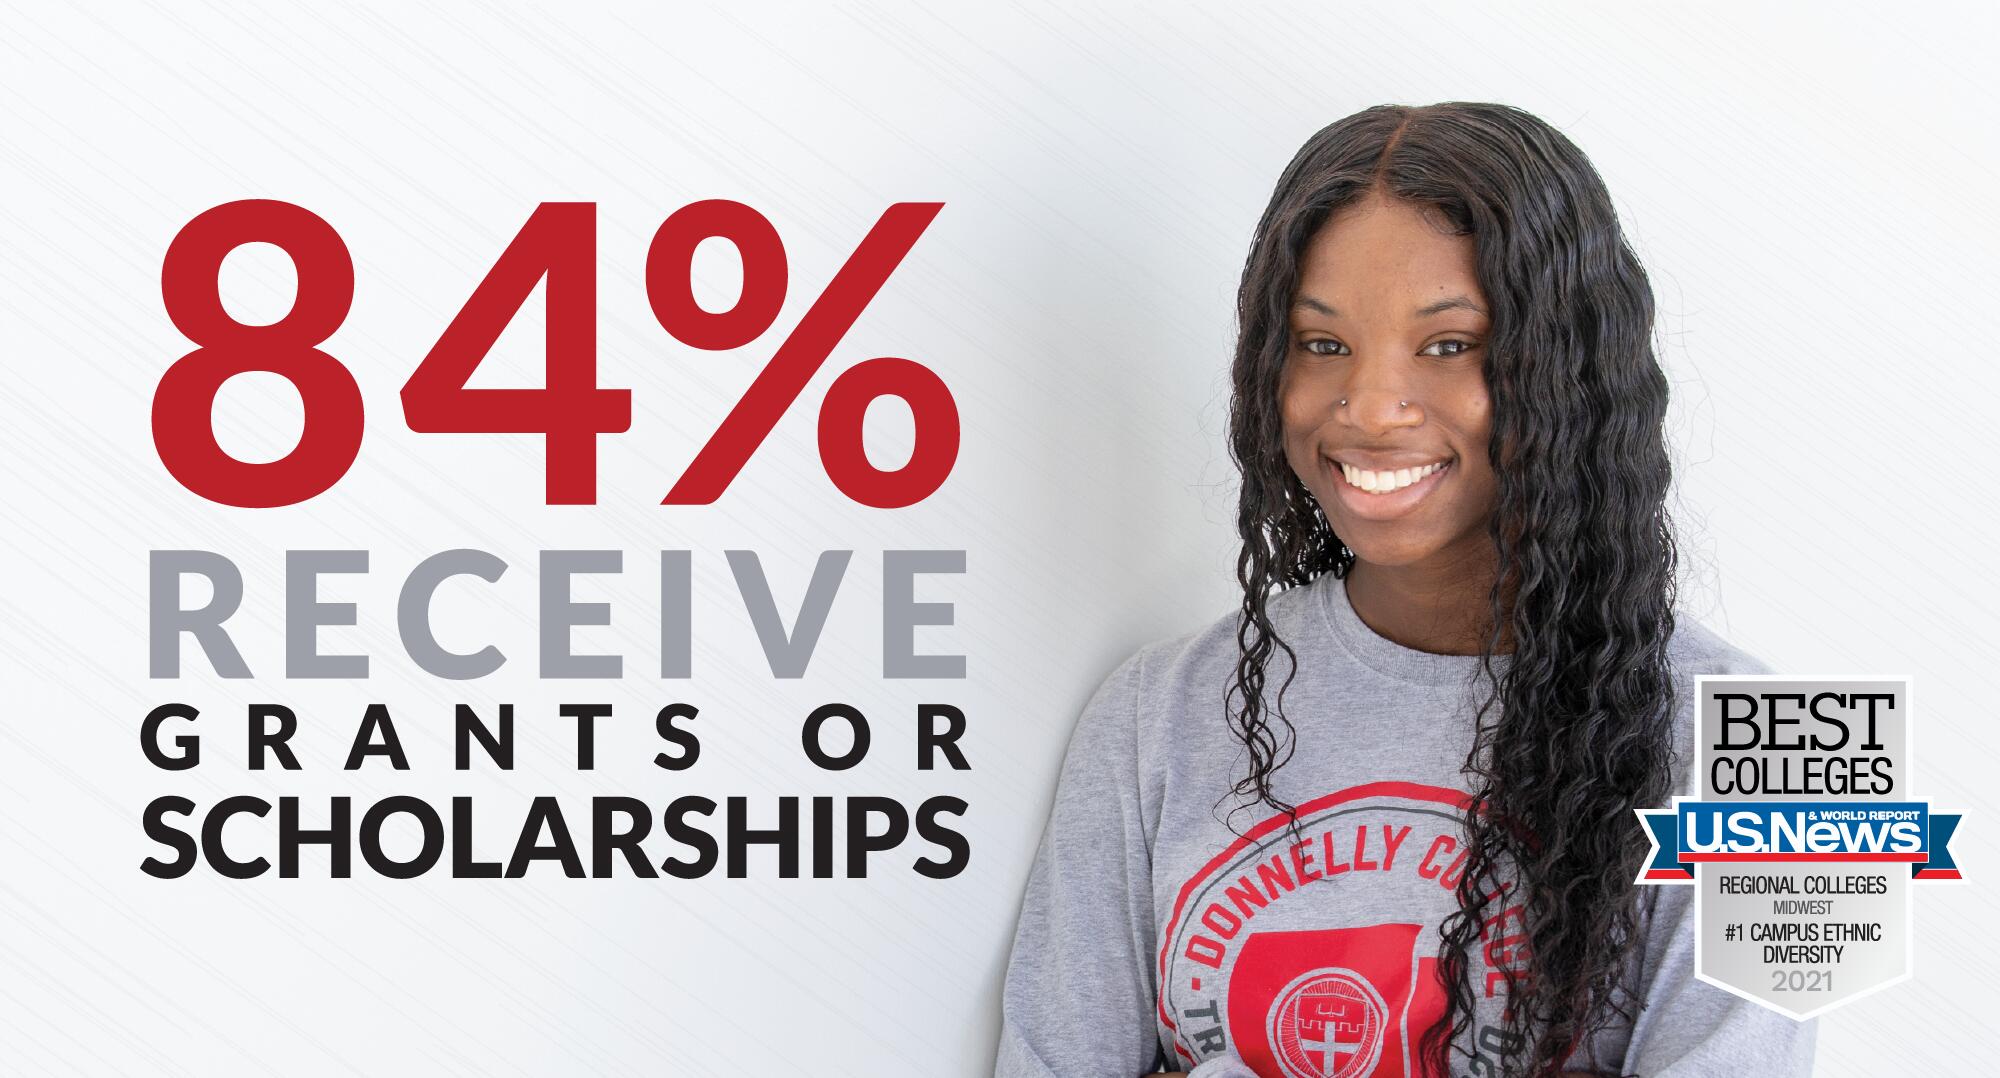 84% receive grants and scholarships